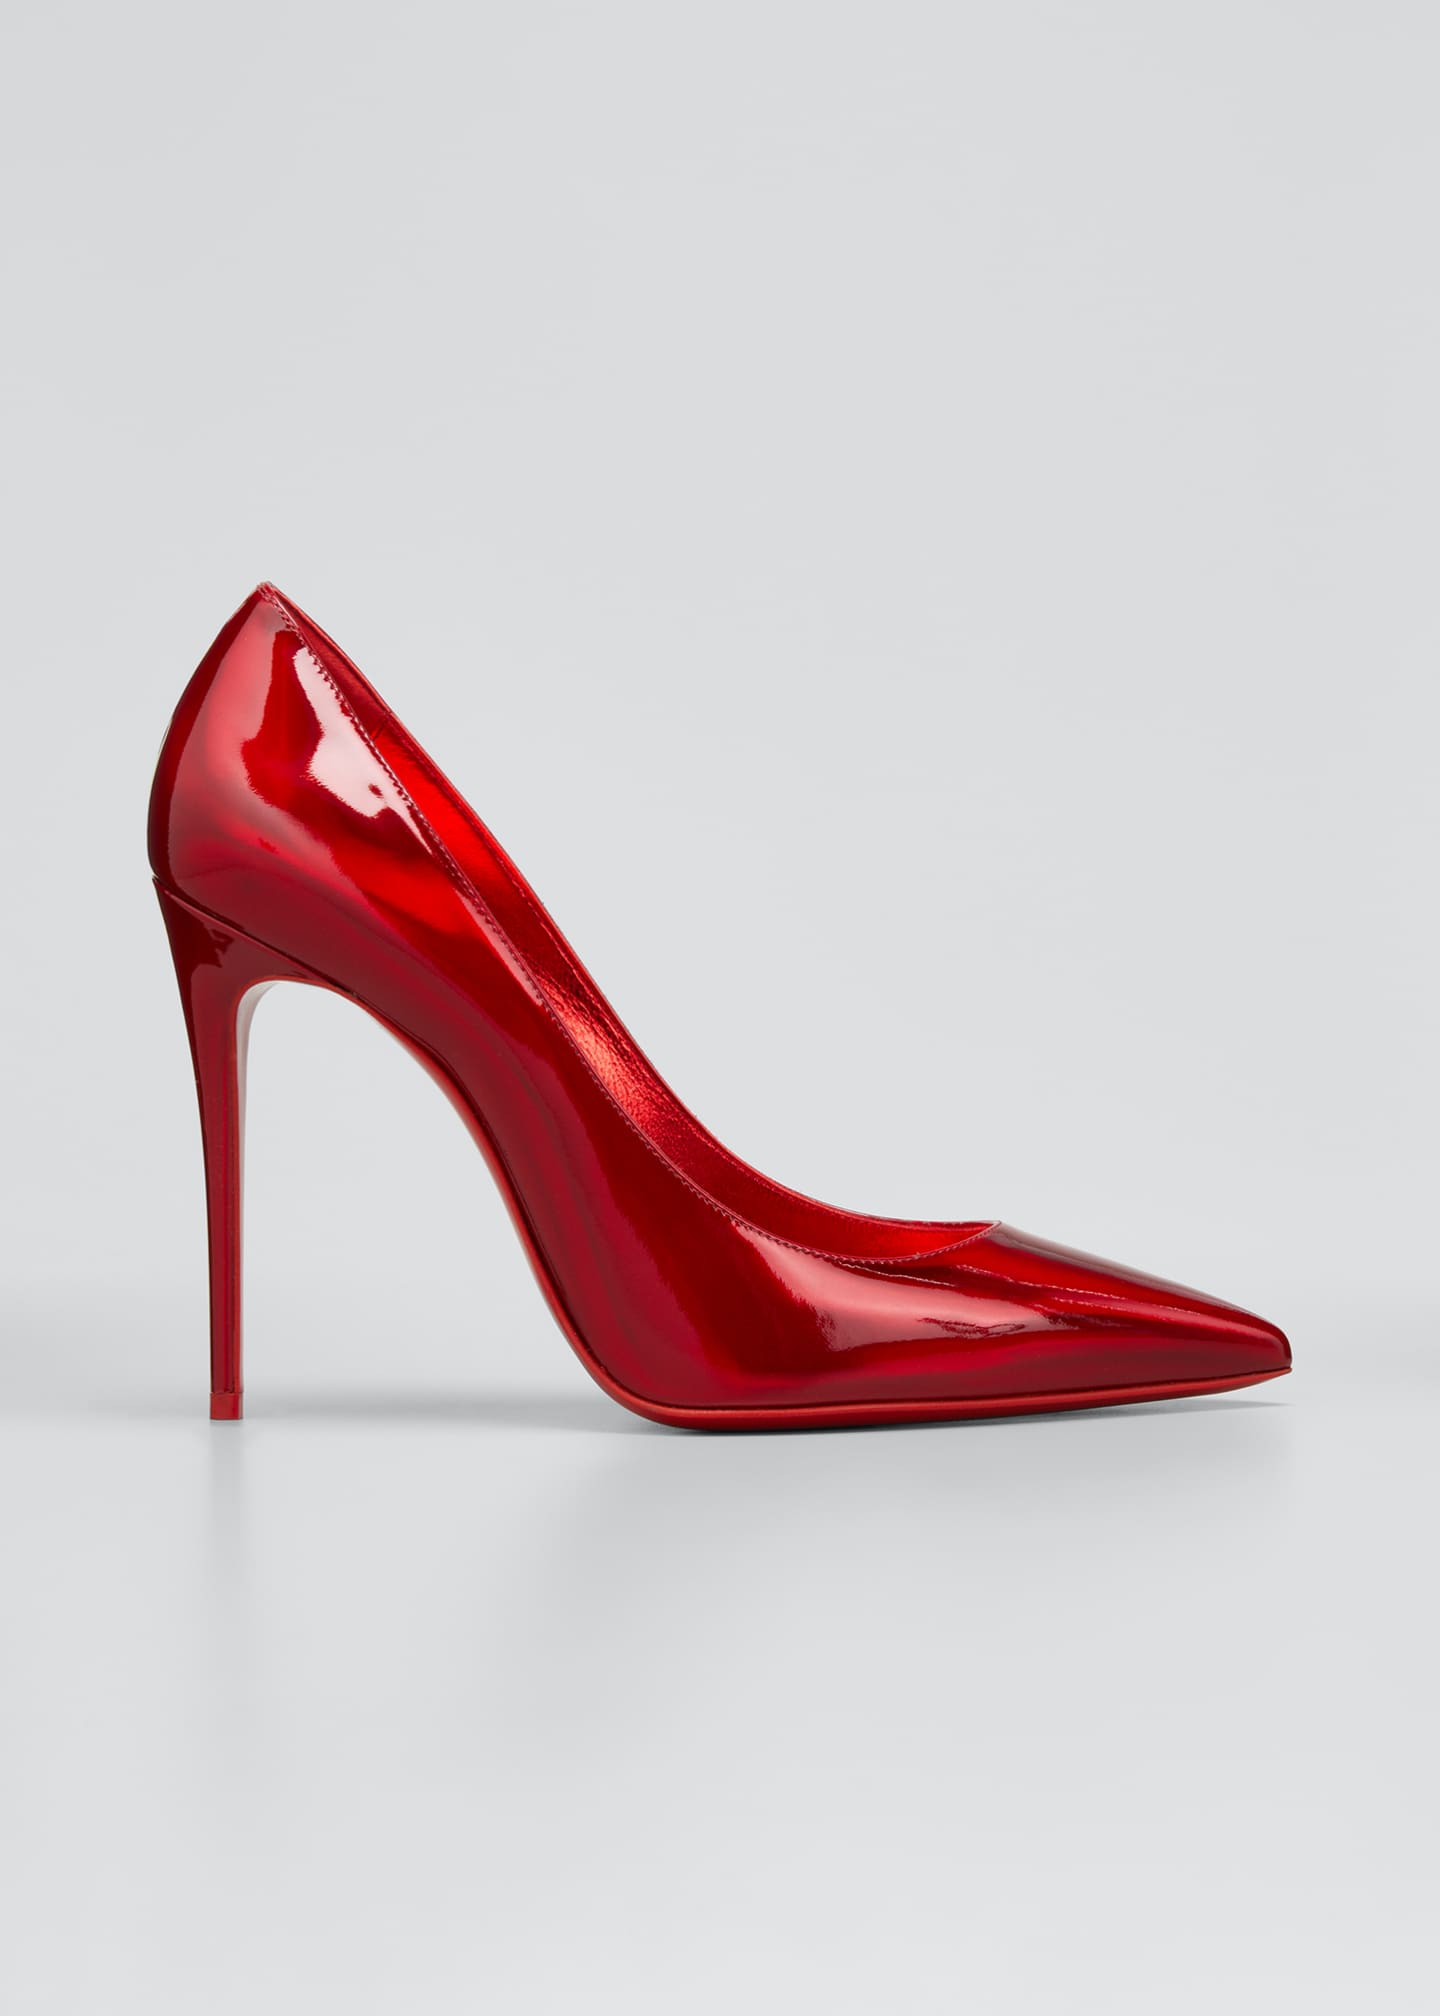 Christian Louboutin Kate Patent Pointed-Toe Red Sole High-Heel Pumps ...